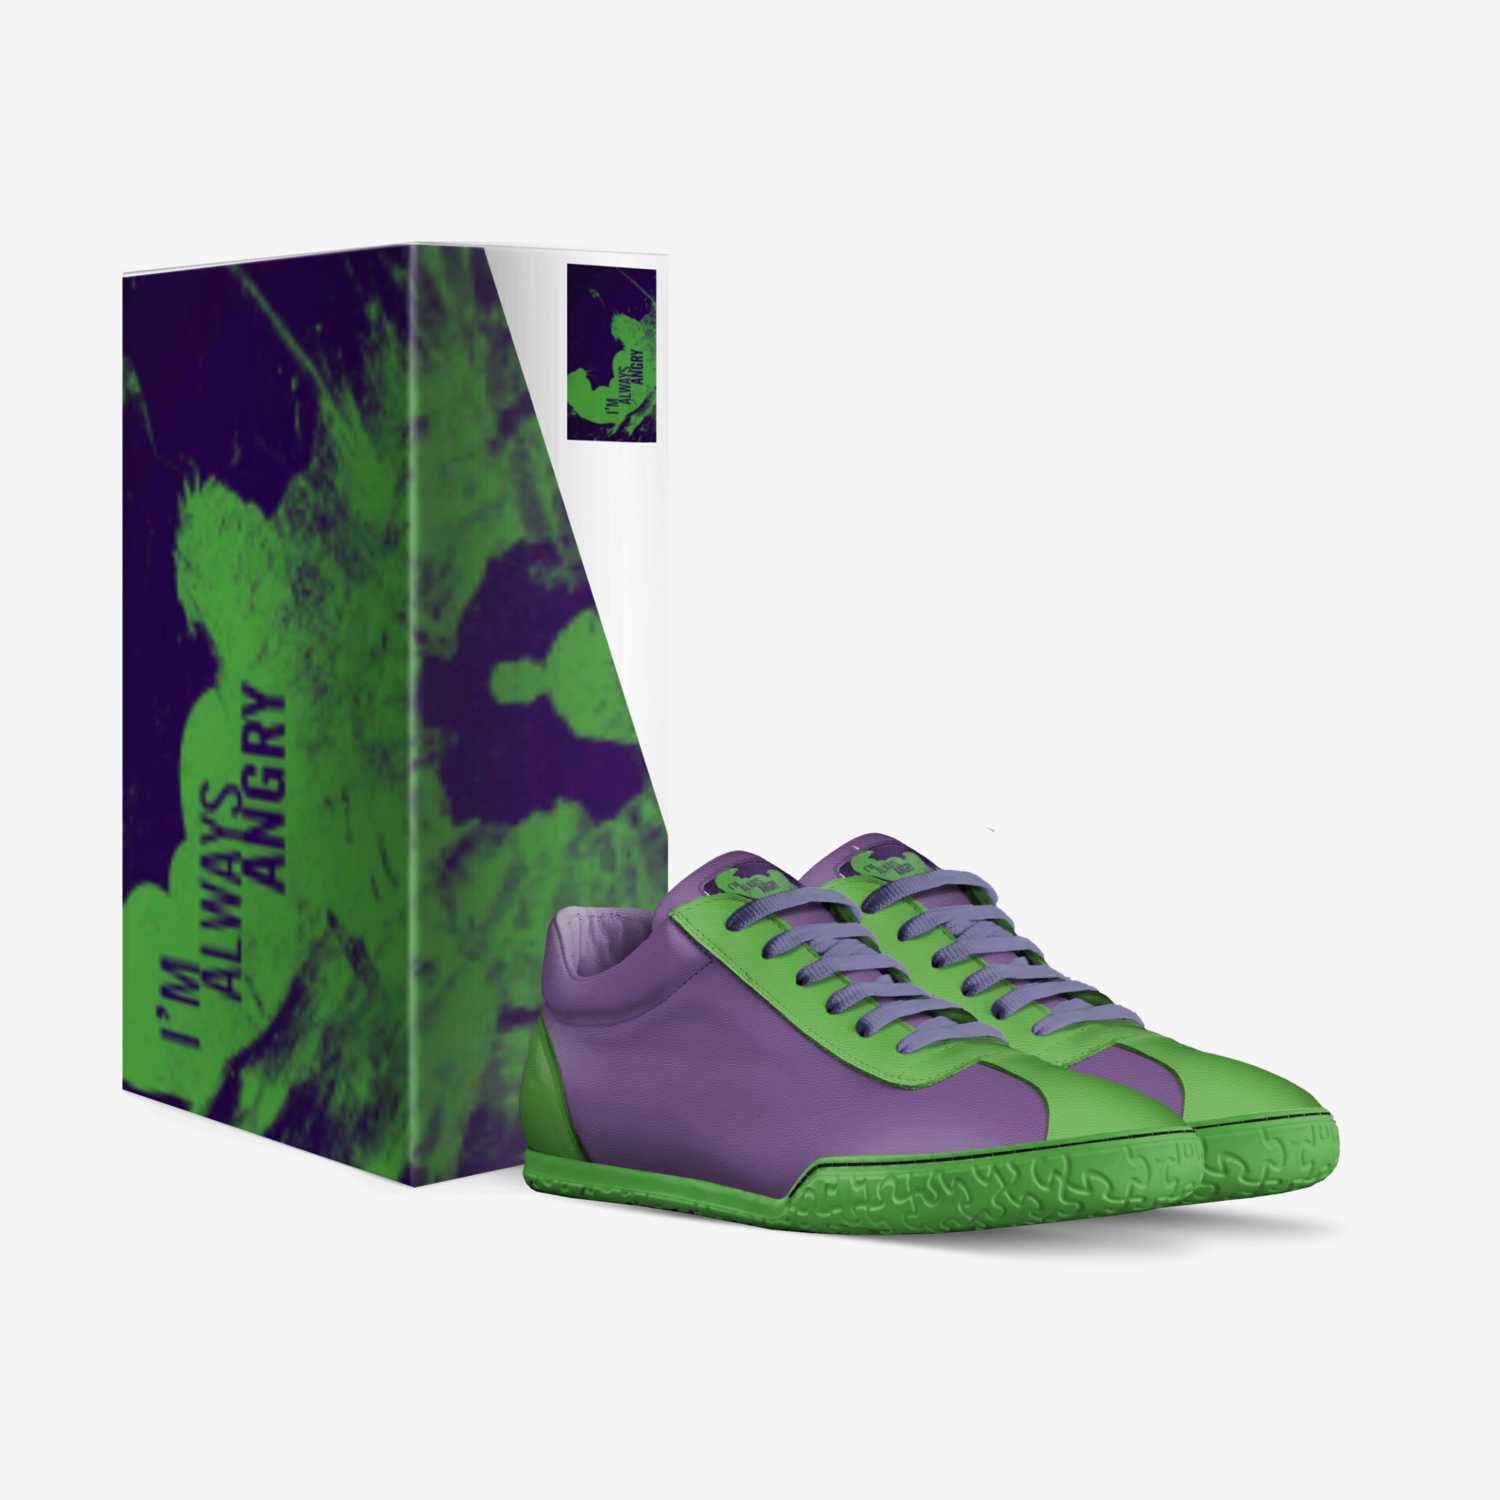 XXHULK custom made in Italy shoes by Tanner Peavler | Box view